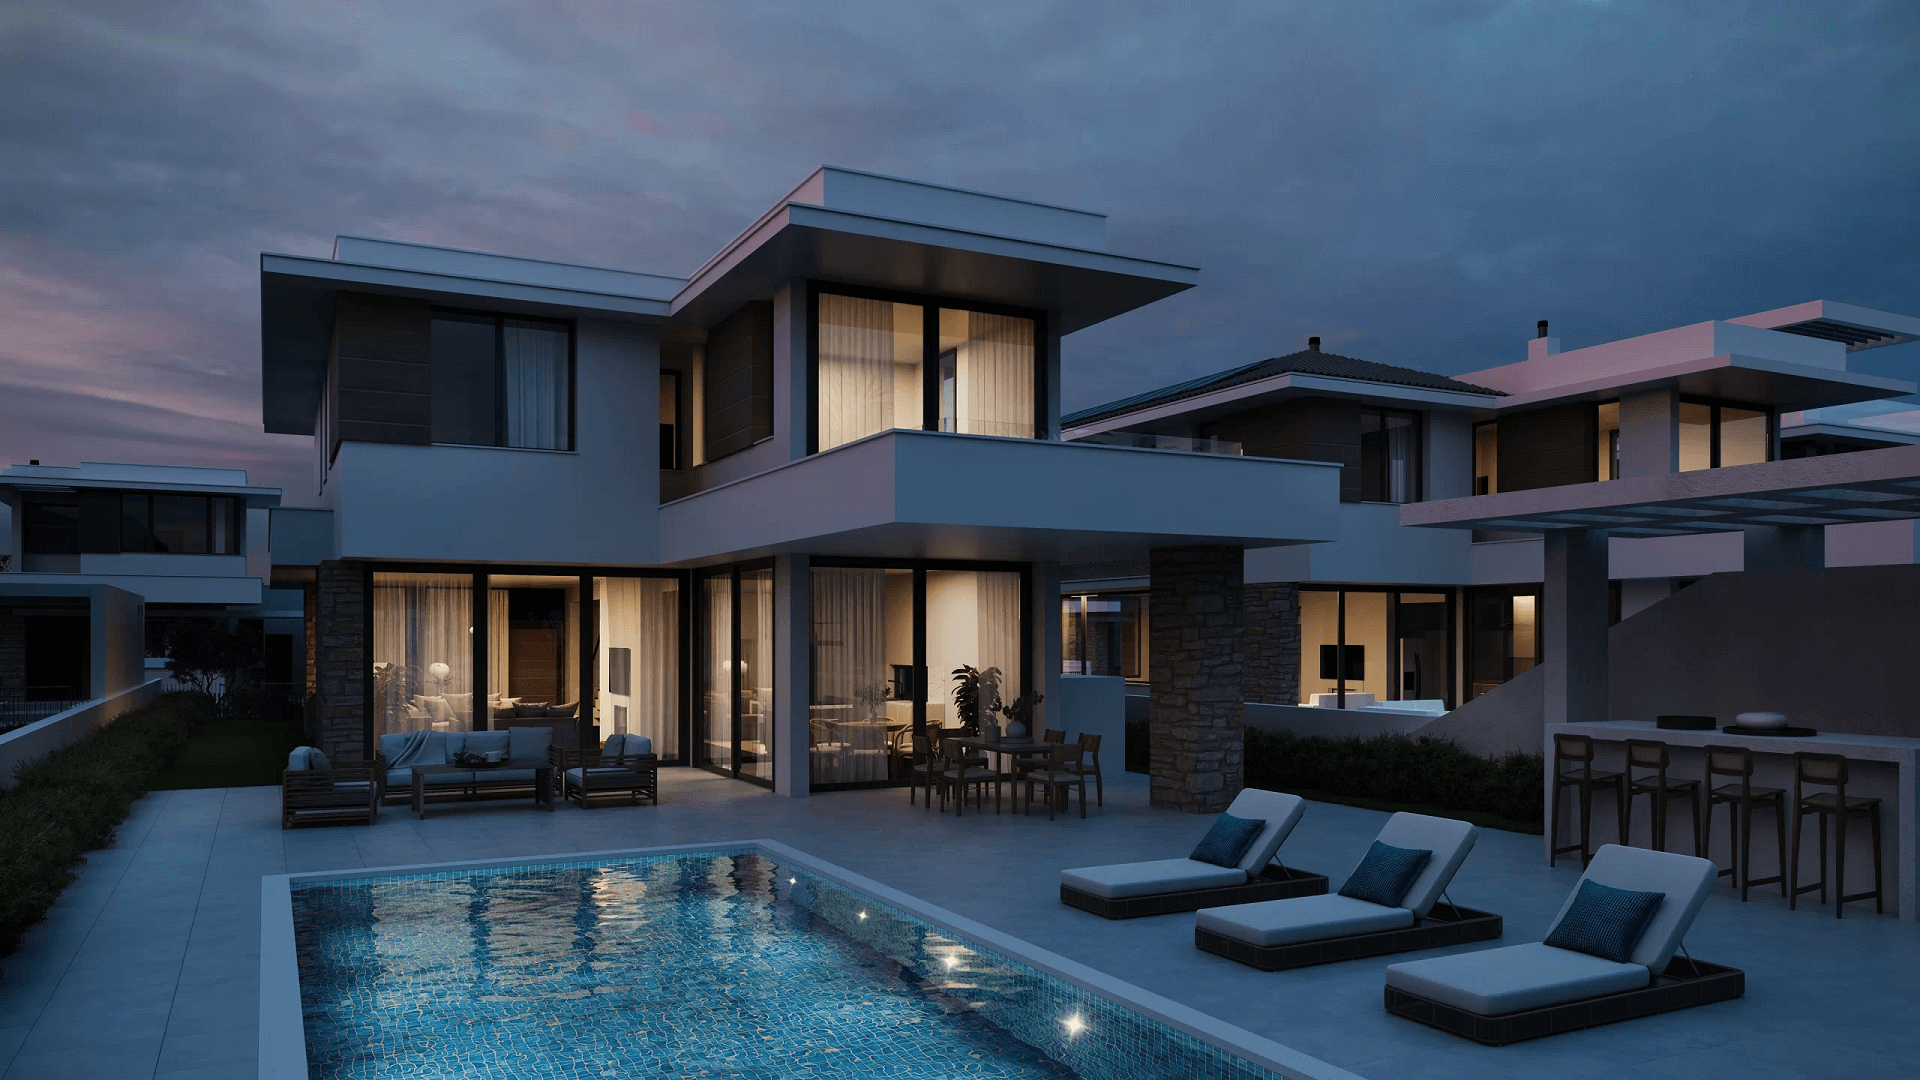 Nighttime 3D Rendering of a Villa with a Pool